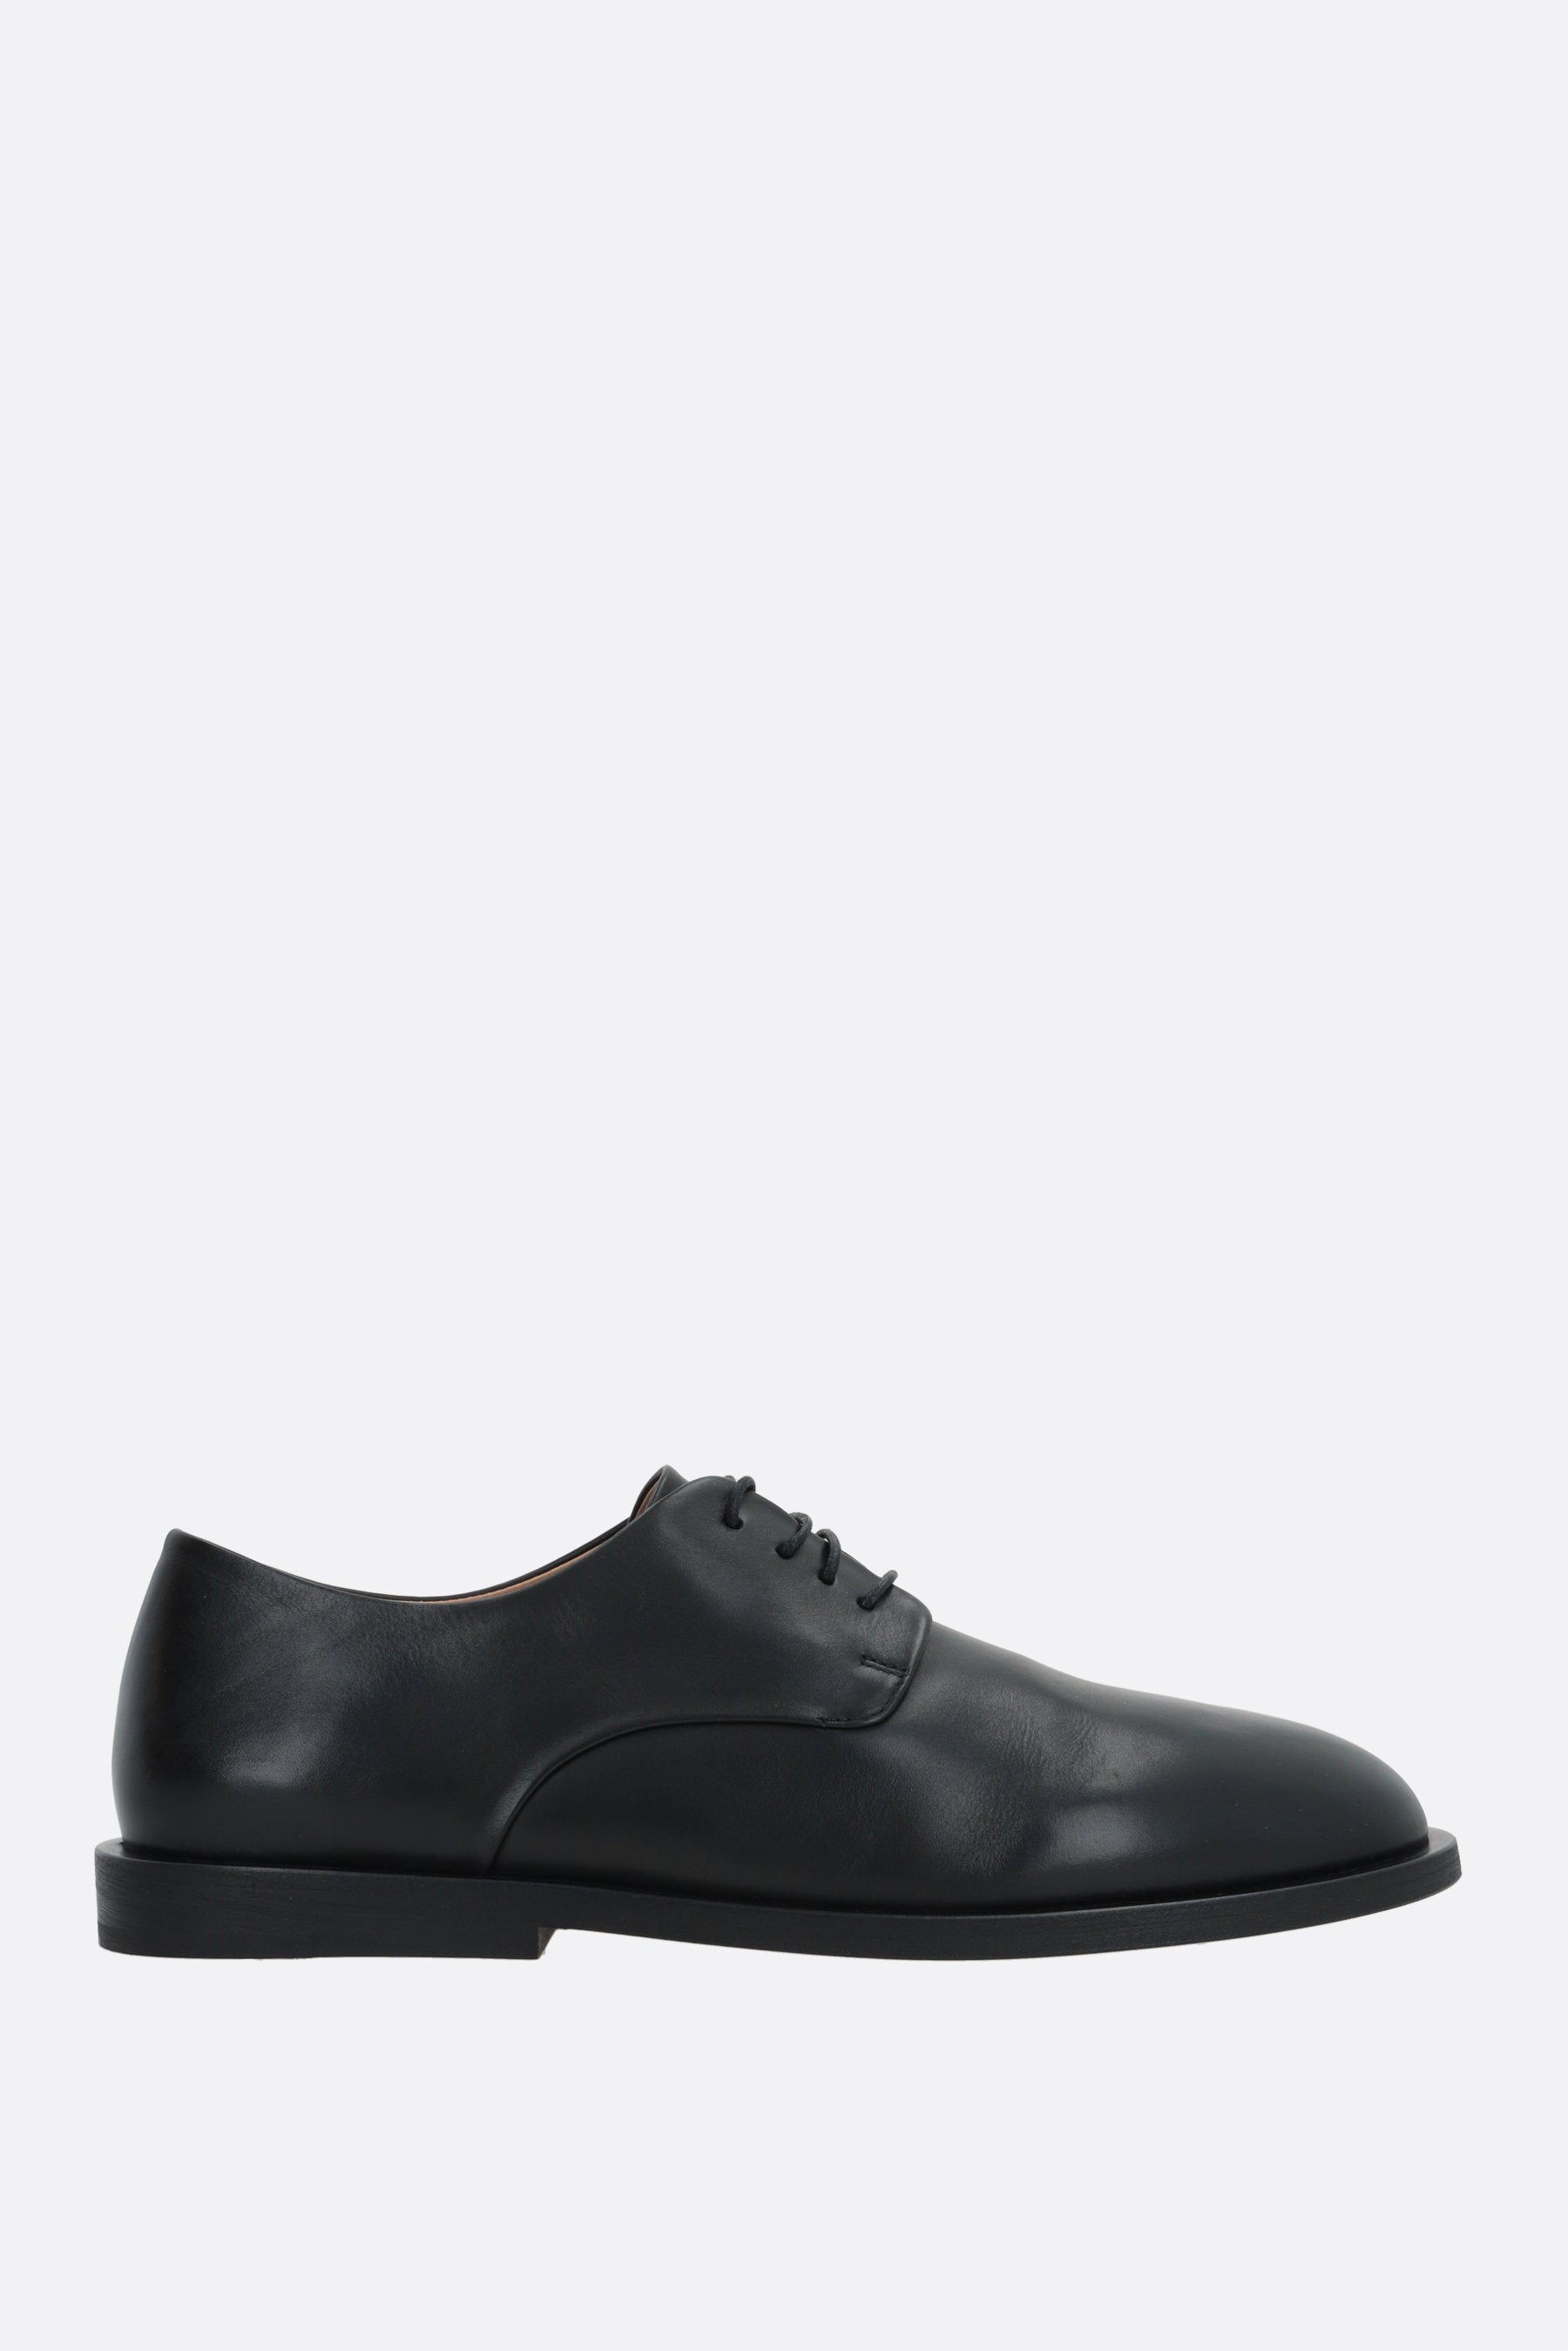 Mando smooth leather derby shoes